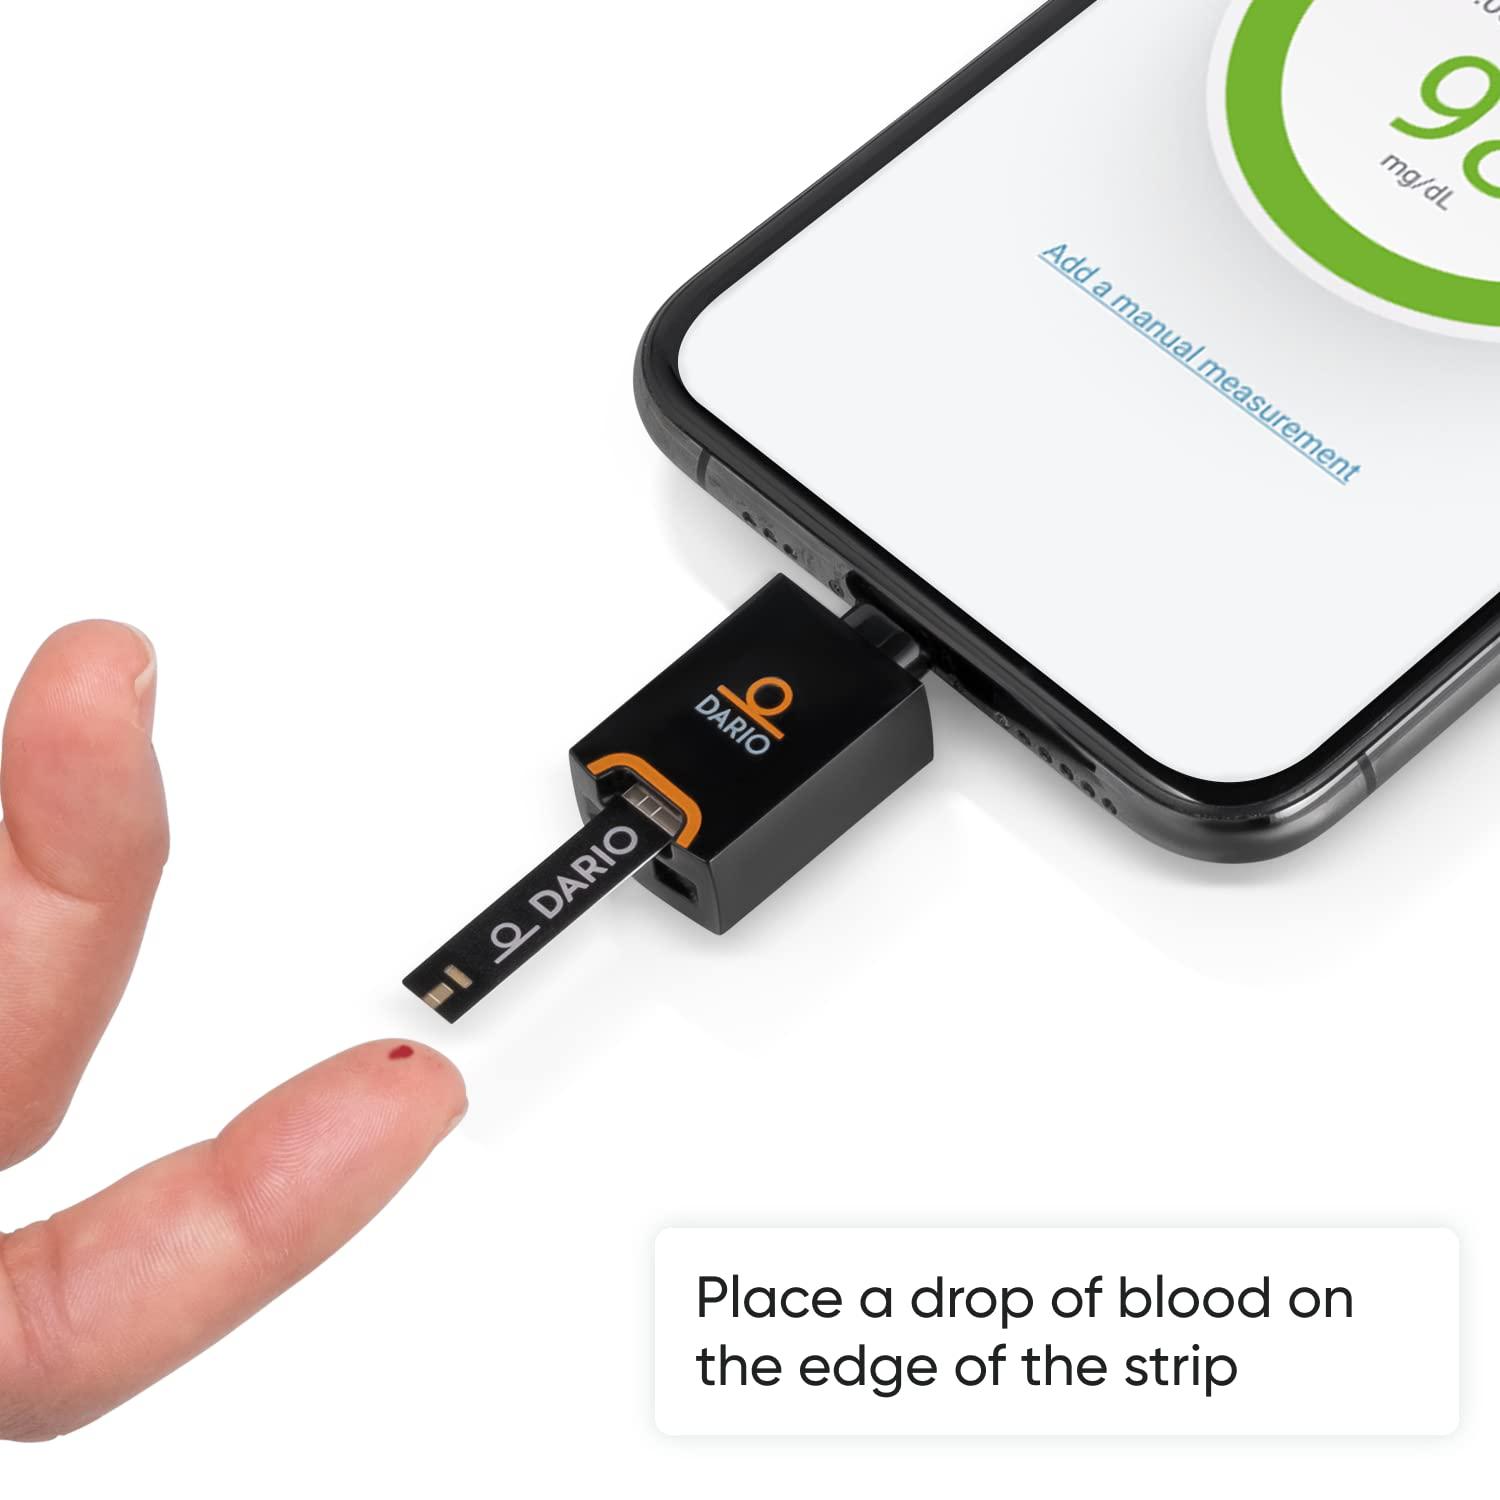 DARIO Blood Glucose Monitor Kit Test Your Blood Sugar Levels and Estimate  A1c After 3m. Kit Includes: Glucose-Meter with 25 Strips,10 Sterile lancets  (Android USB-C)